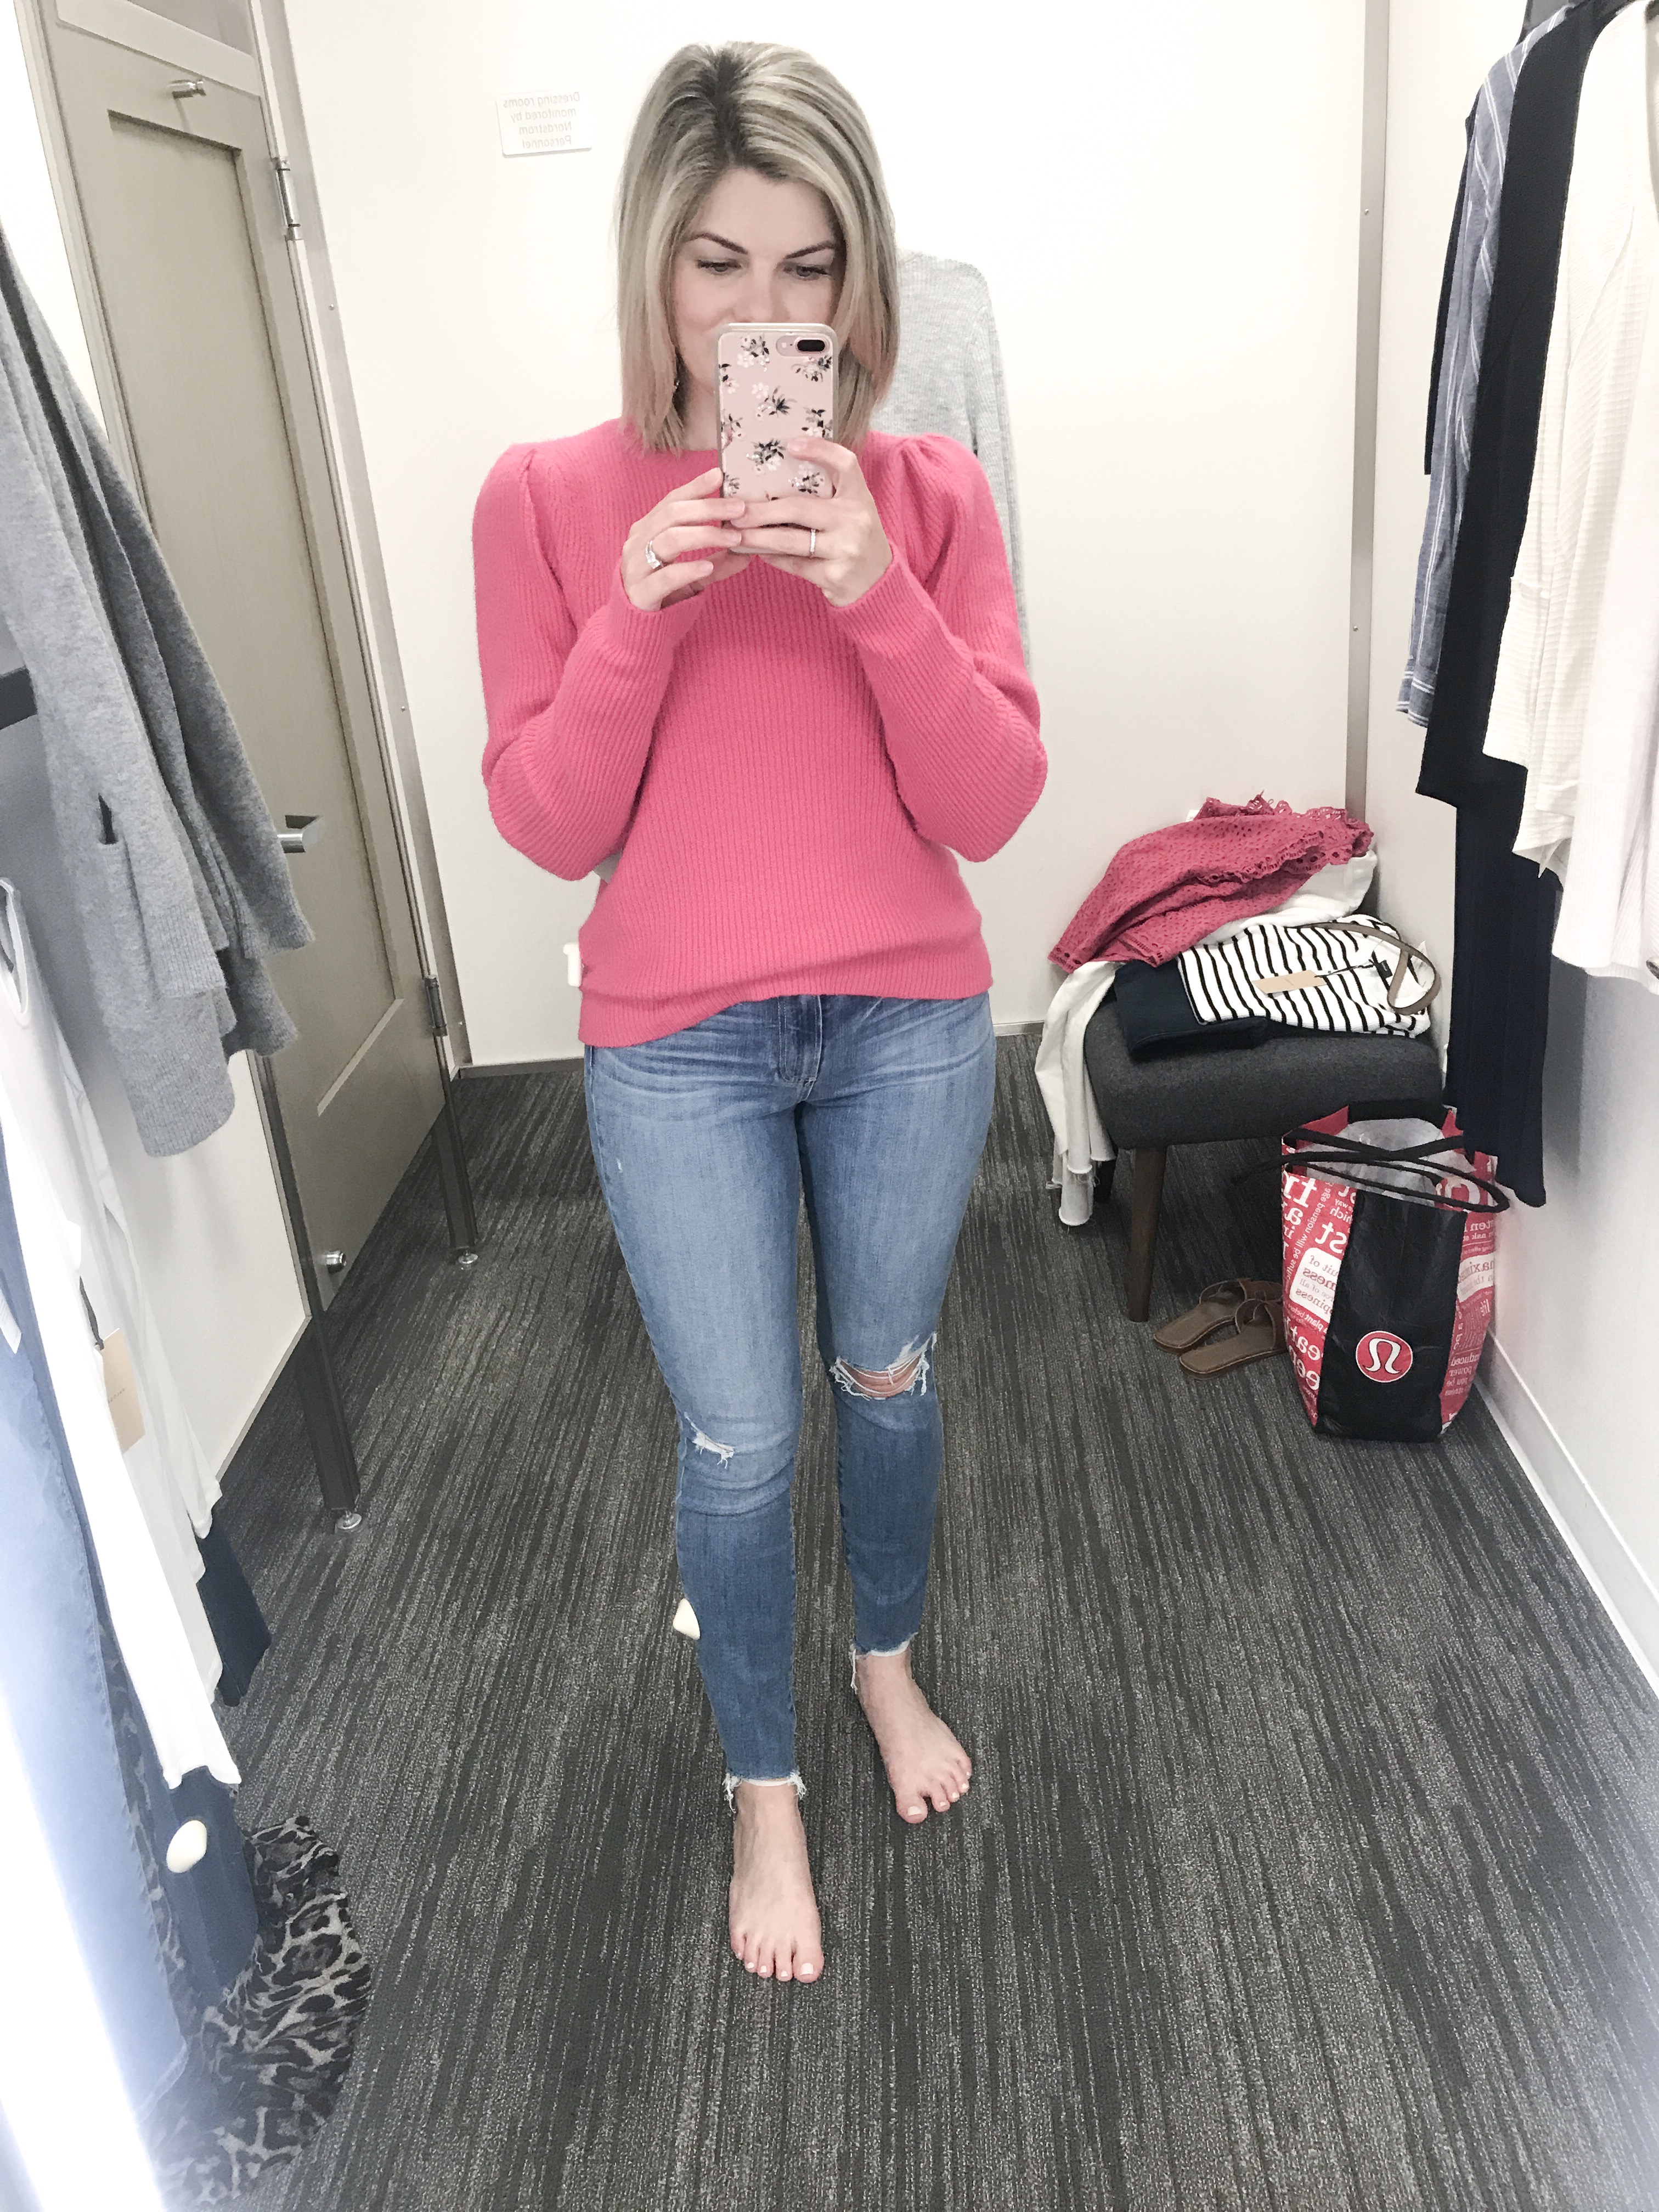 Try-On Haul Part 3 - Nordstrom Anniversary Sale 2022